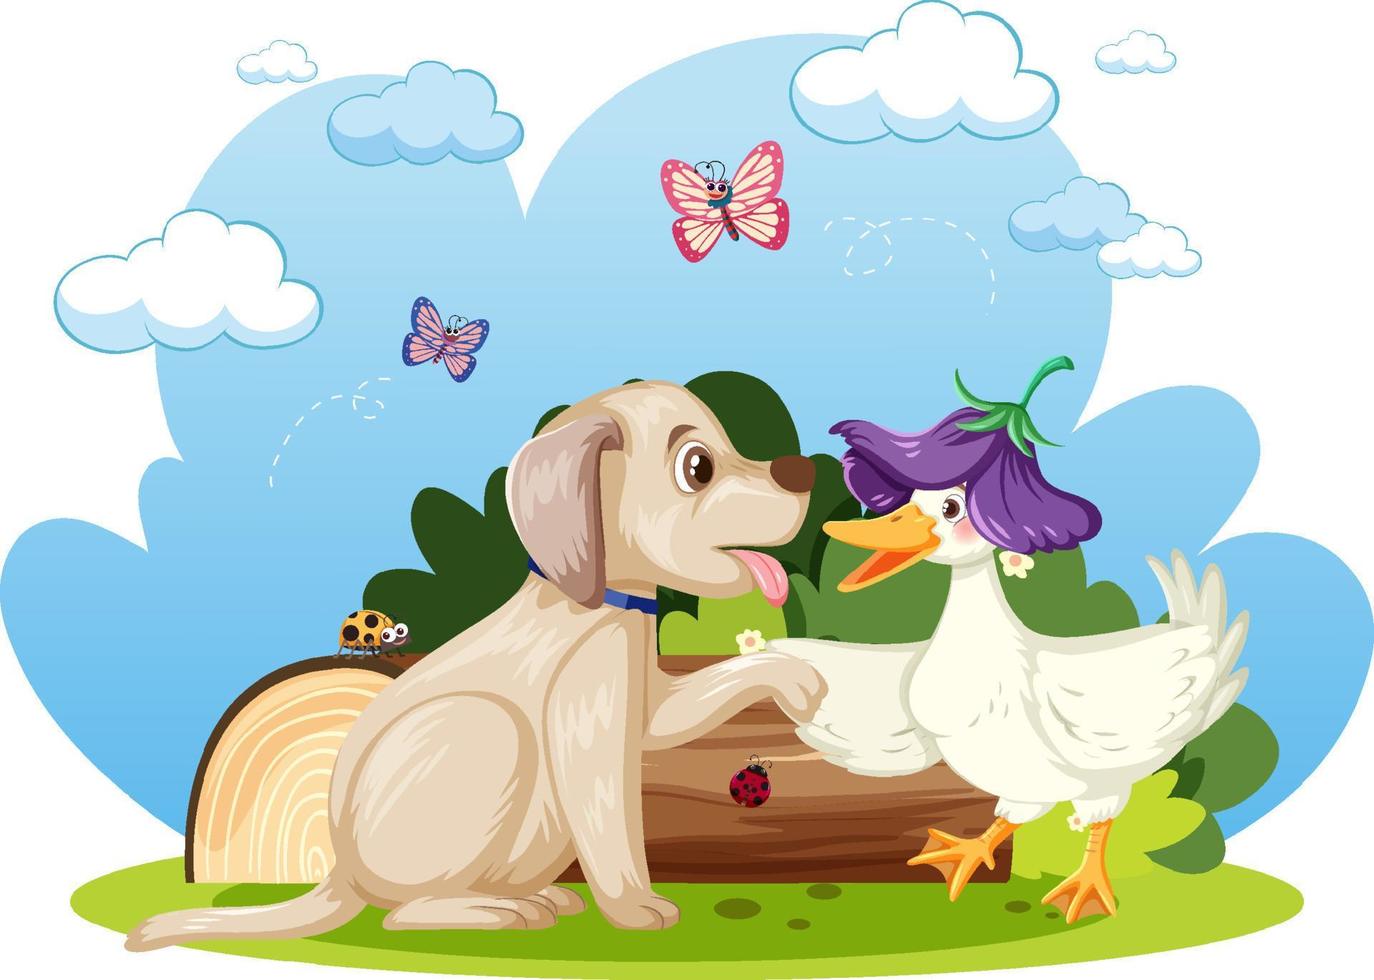 Cute dog and duck shaking hands vector